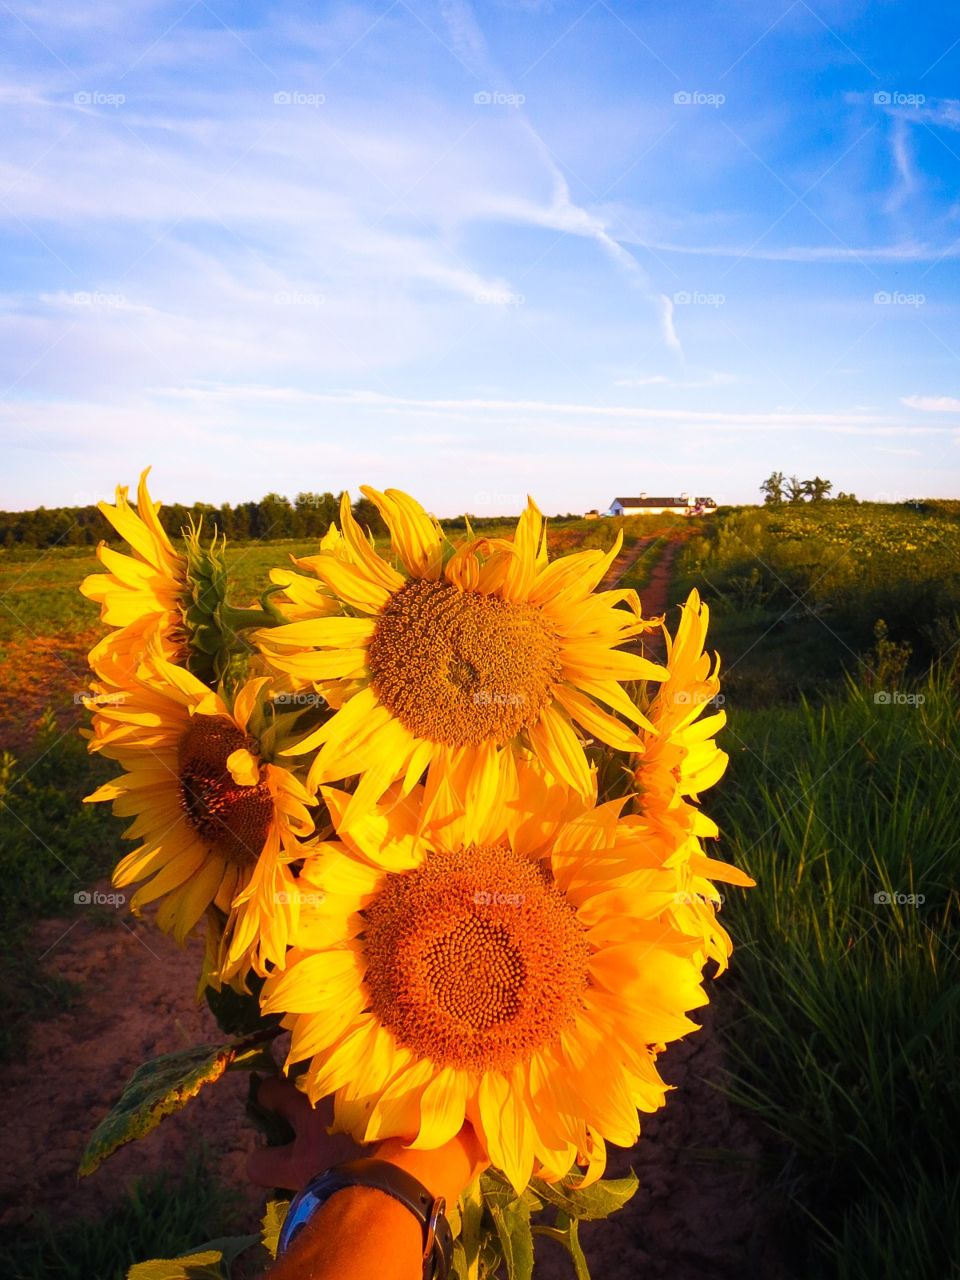 Almost a Handful of Sunshine. Picking sunflowers from a field on a summer evening at sunset